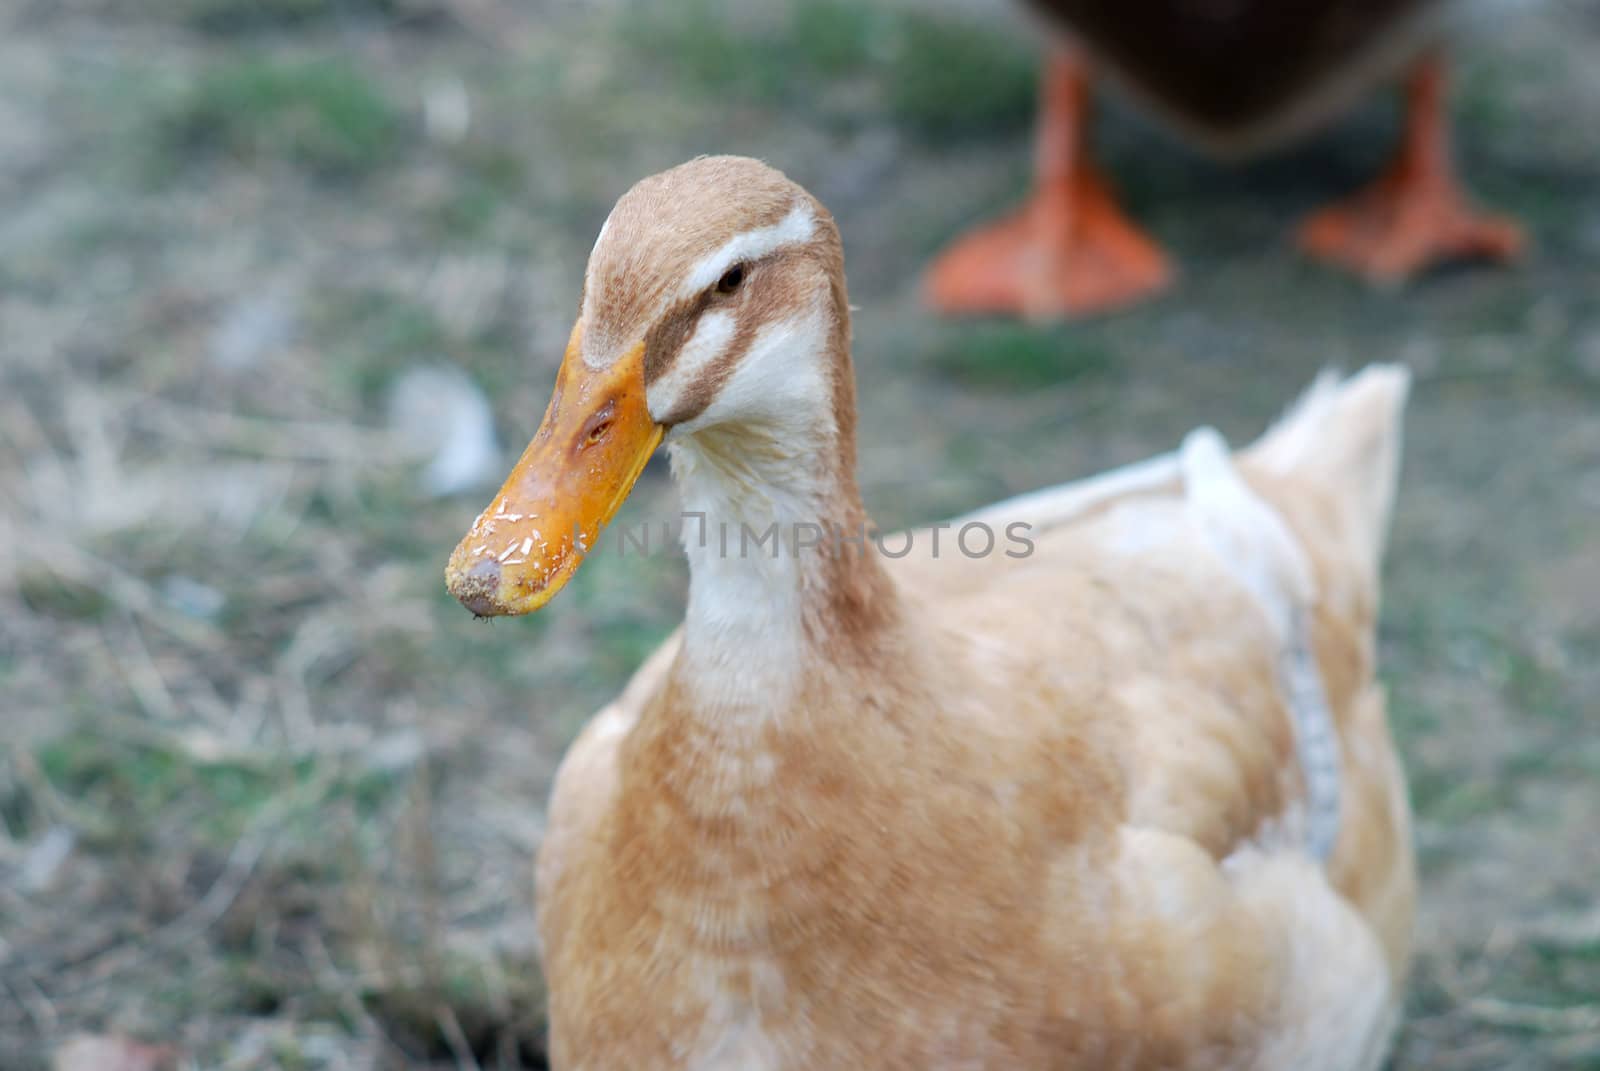 picture of a duck